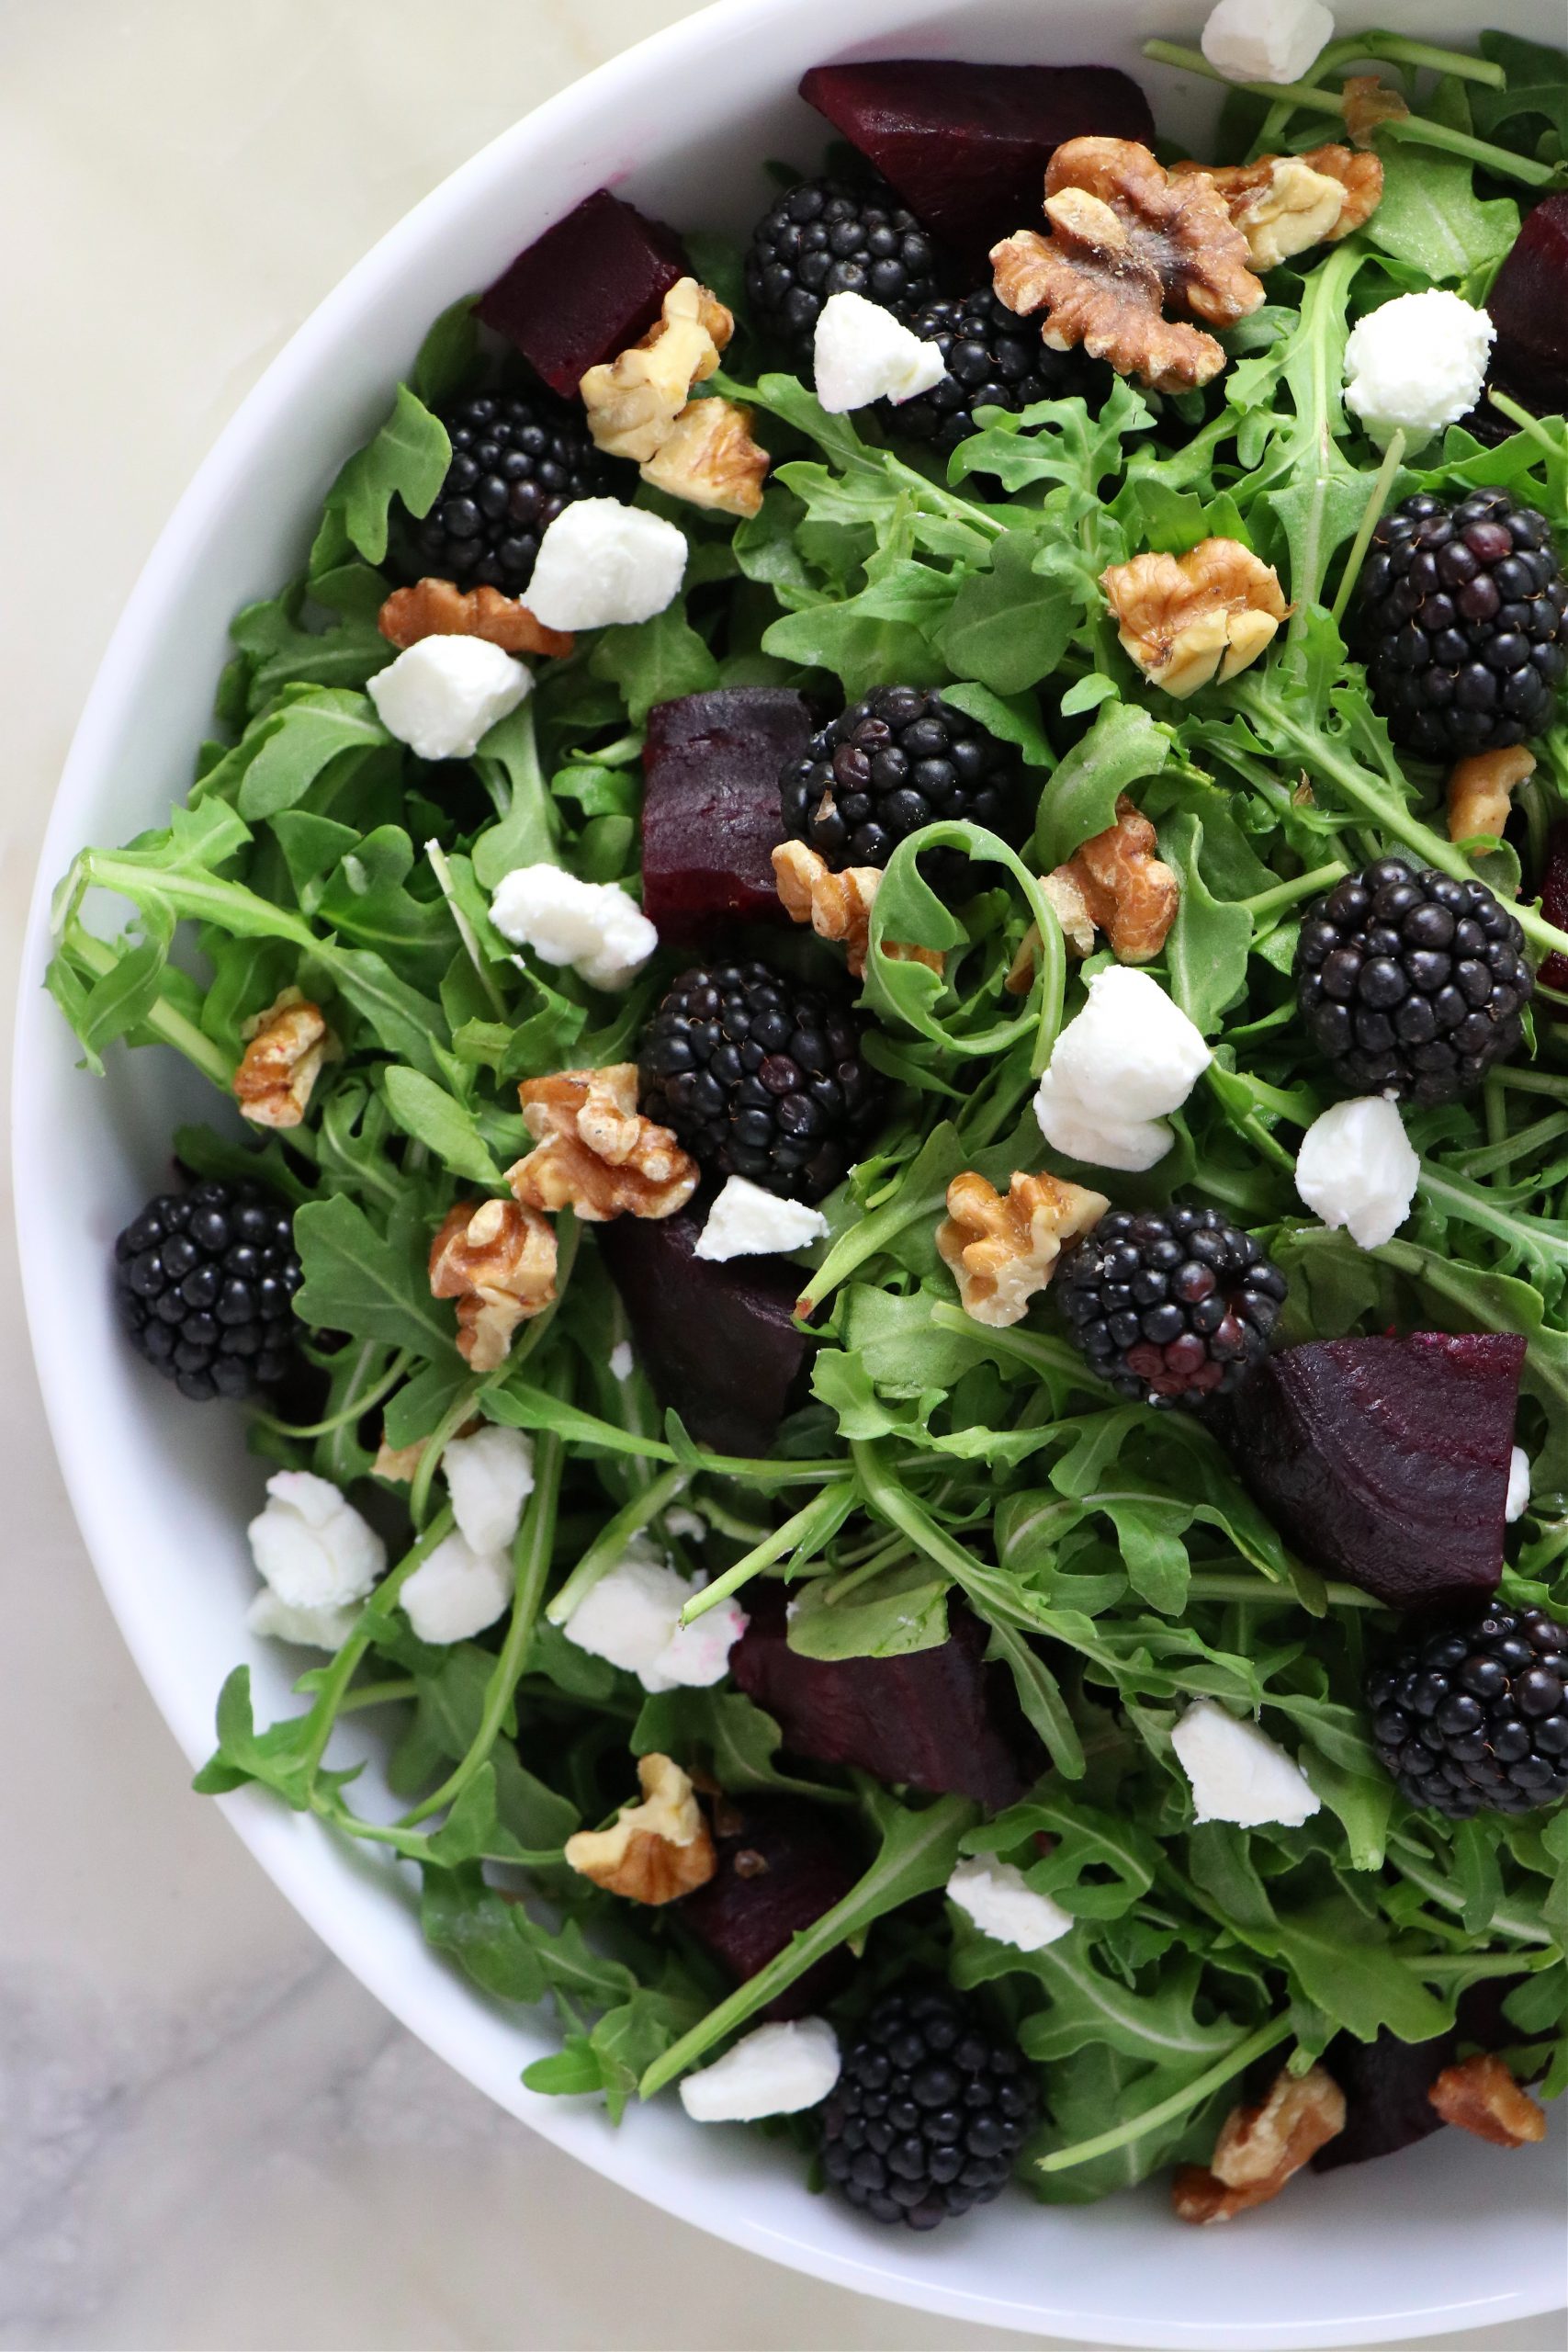 Roasted Beet Salad with Toasted Walnuts and Blackberries